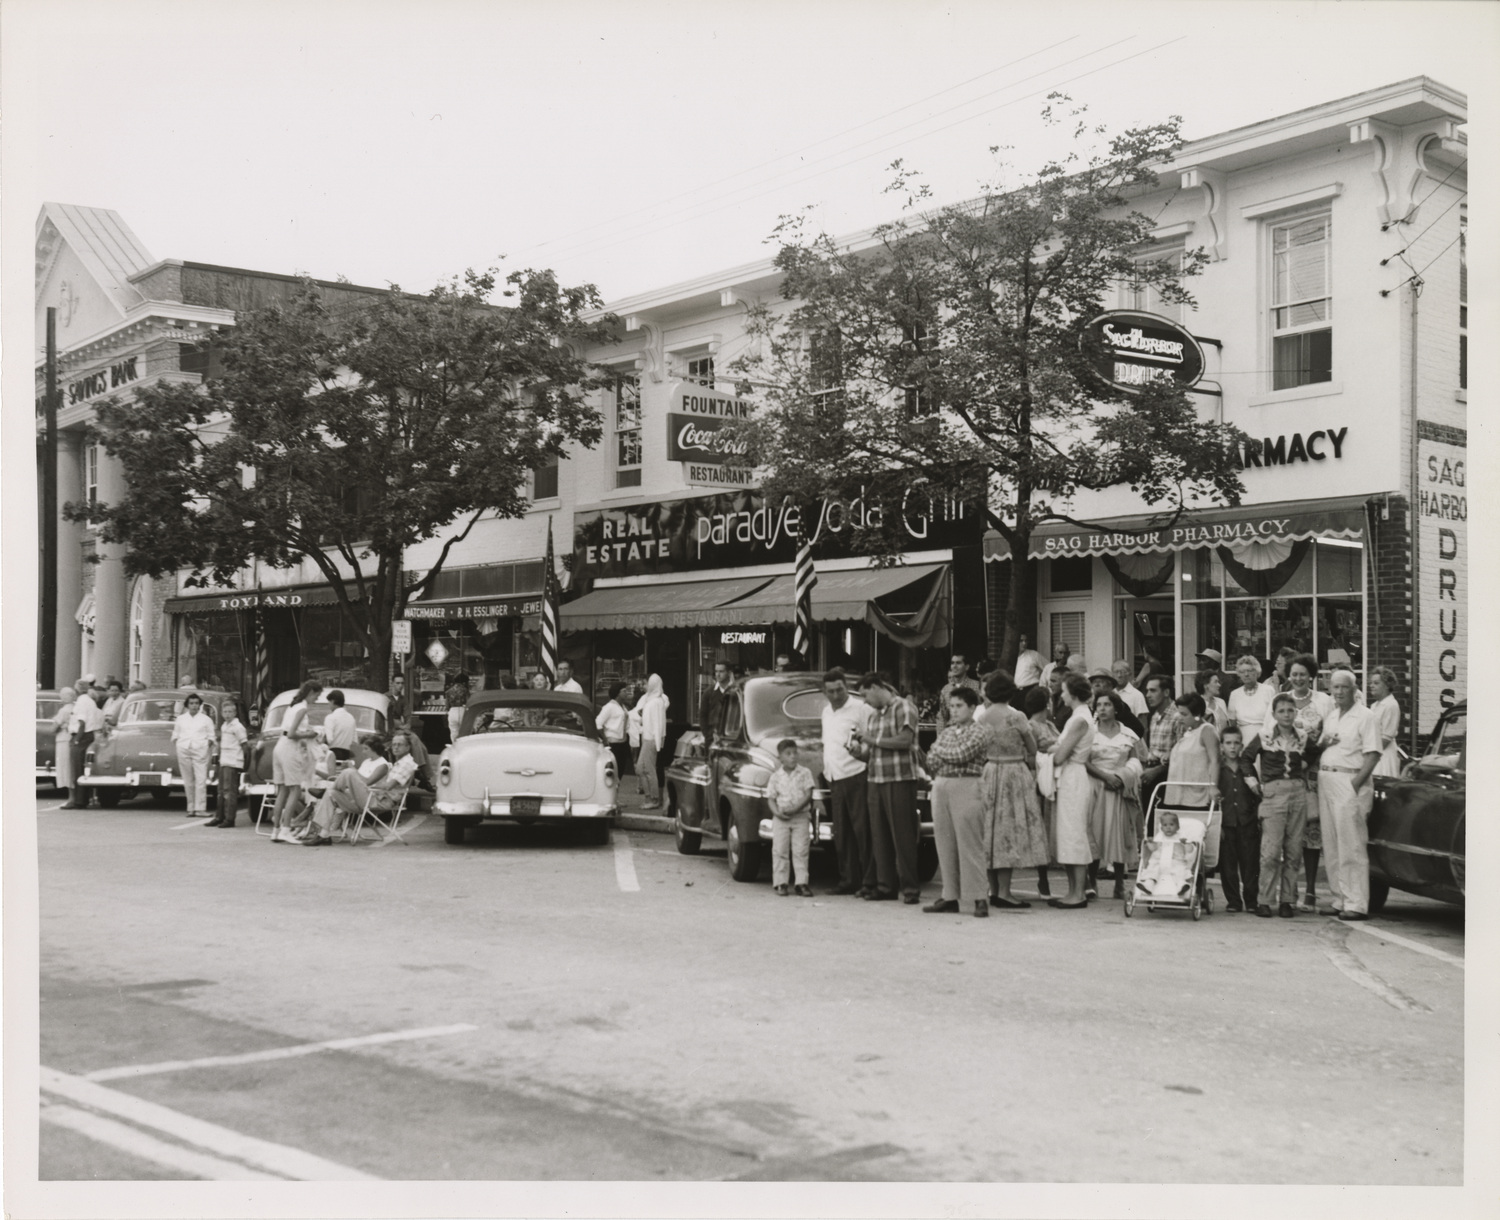 A view looking south on Main Street when Sag Harbor Village held a parade to celebrate its 250th anniversary on Labor Day weekend in 1957. COURTESY JOHN JERMAIN MEMORIAL LIBRARY